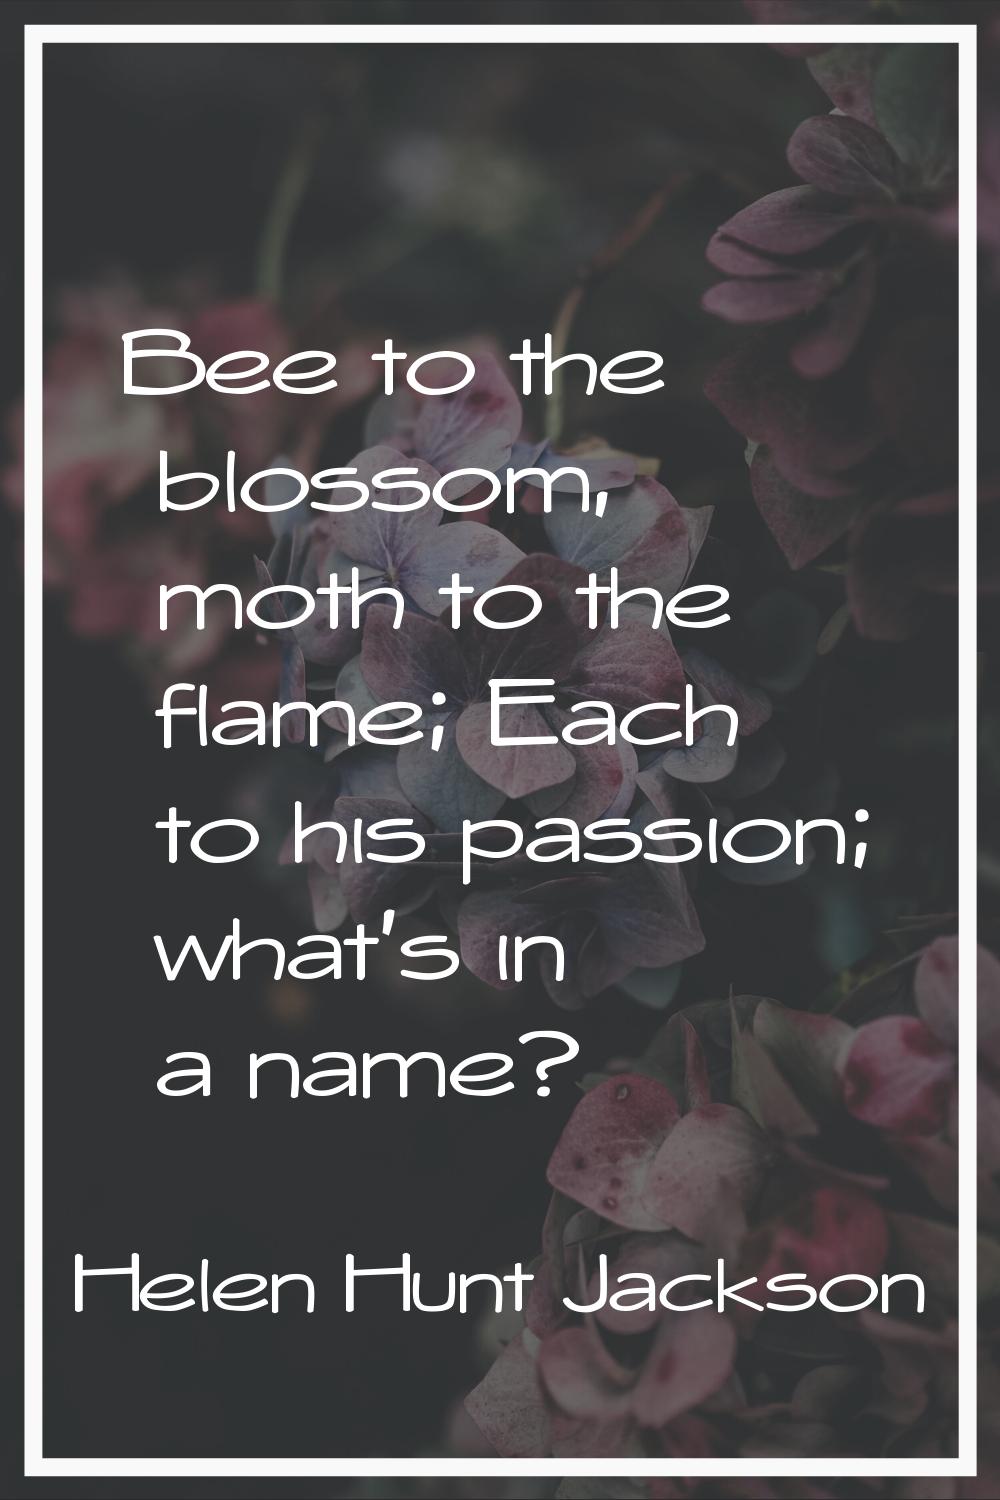 Bee to the blossom, moth to the flame; Each to his passion; what's in a name?